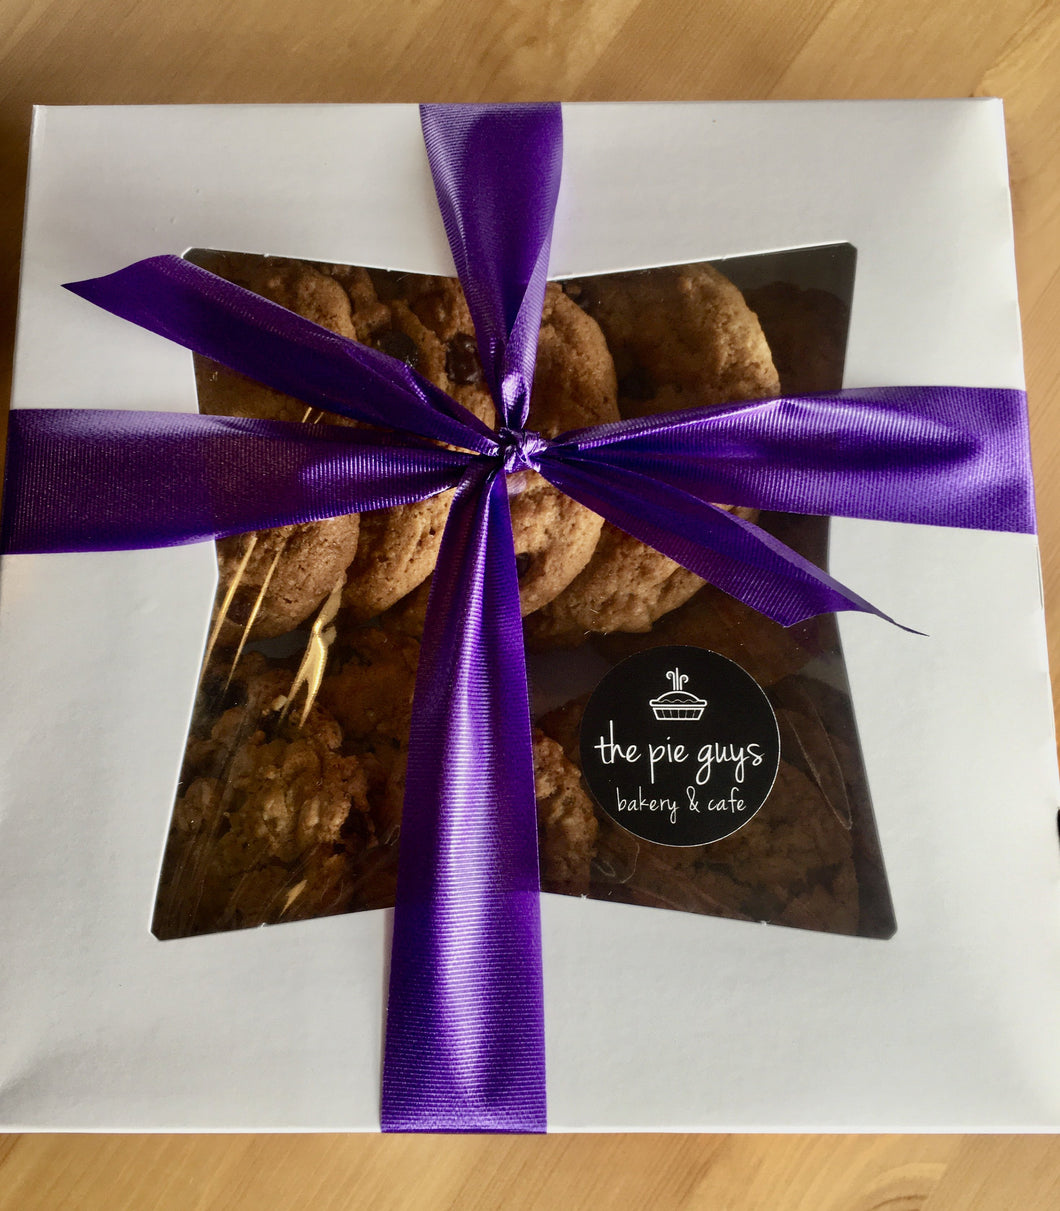 White box full of mixed cookies decorated with purple bow and official company sticker